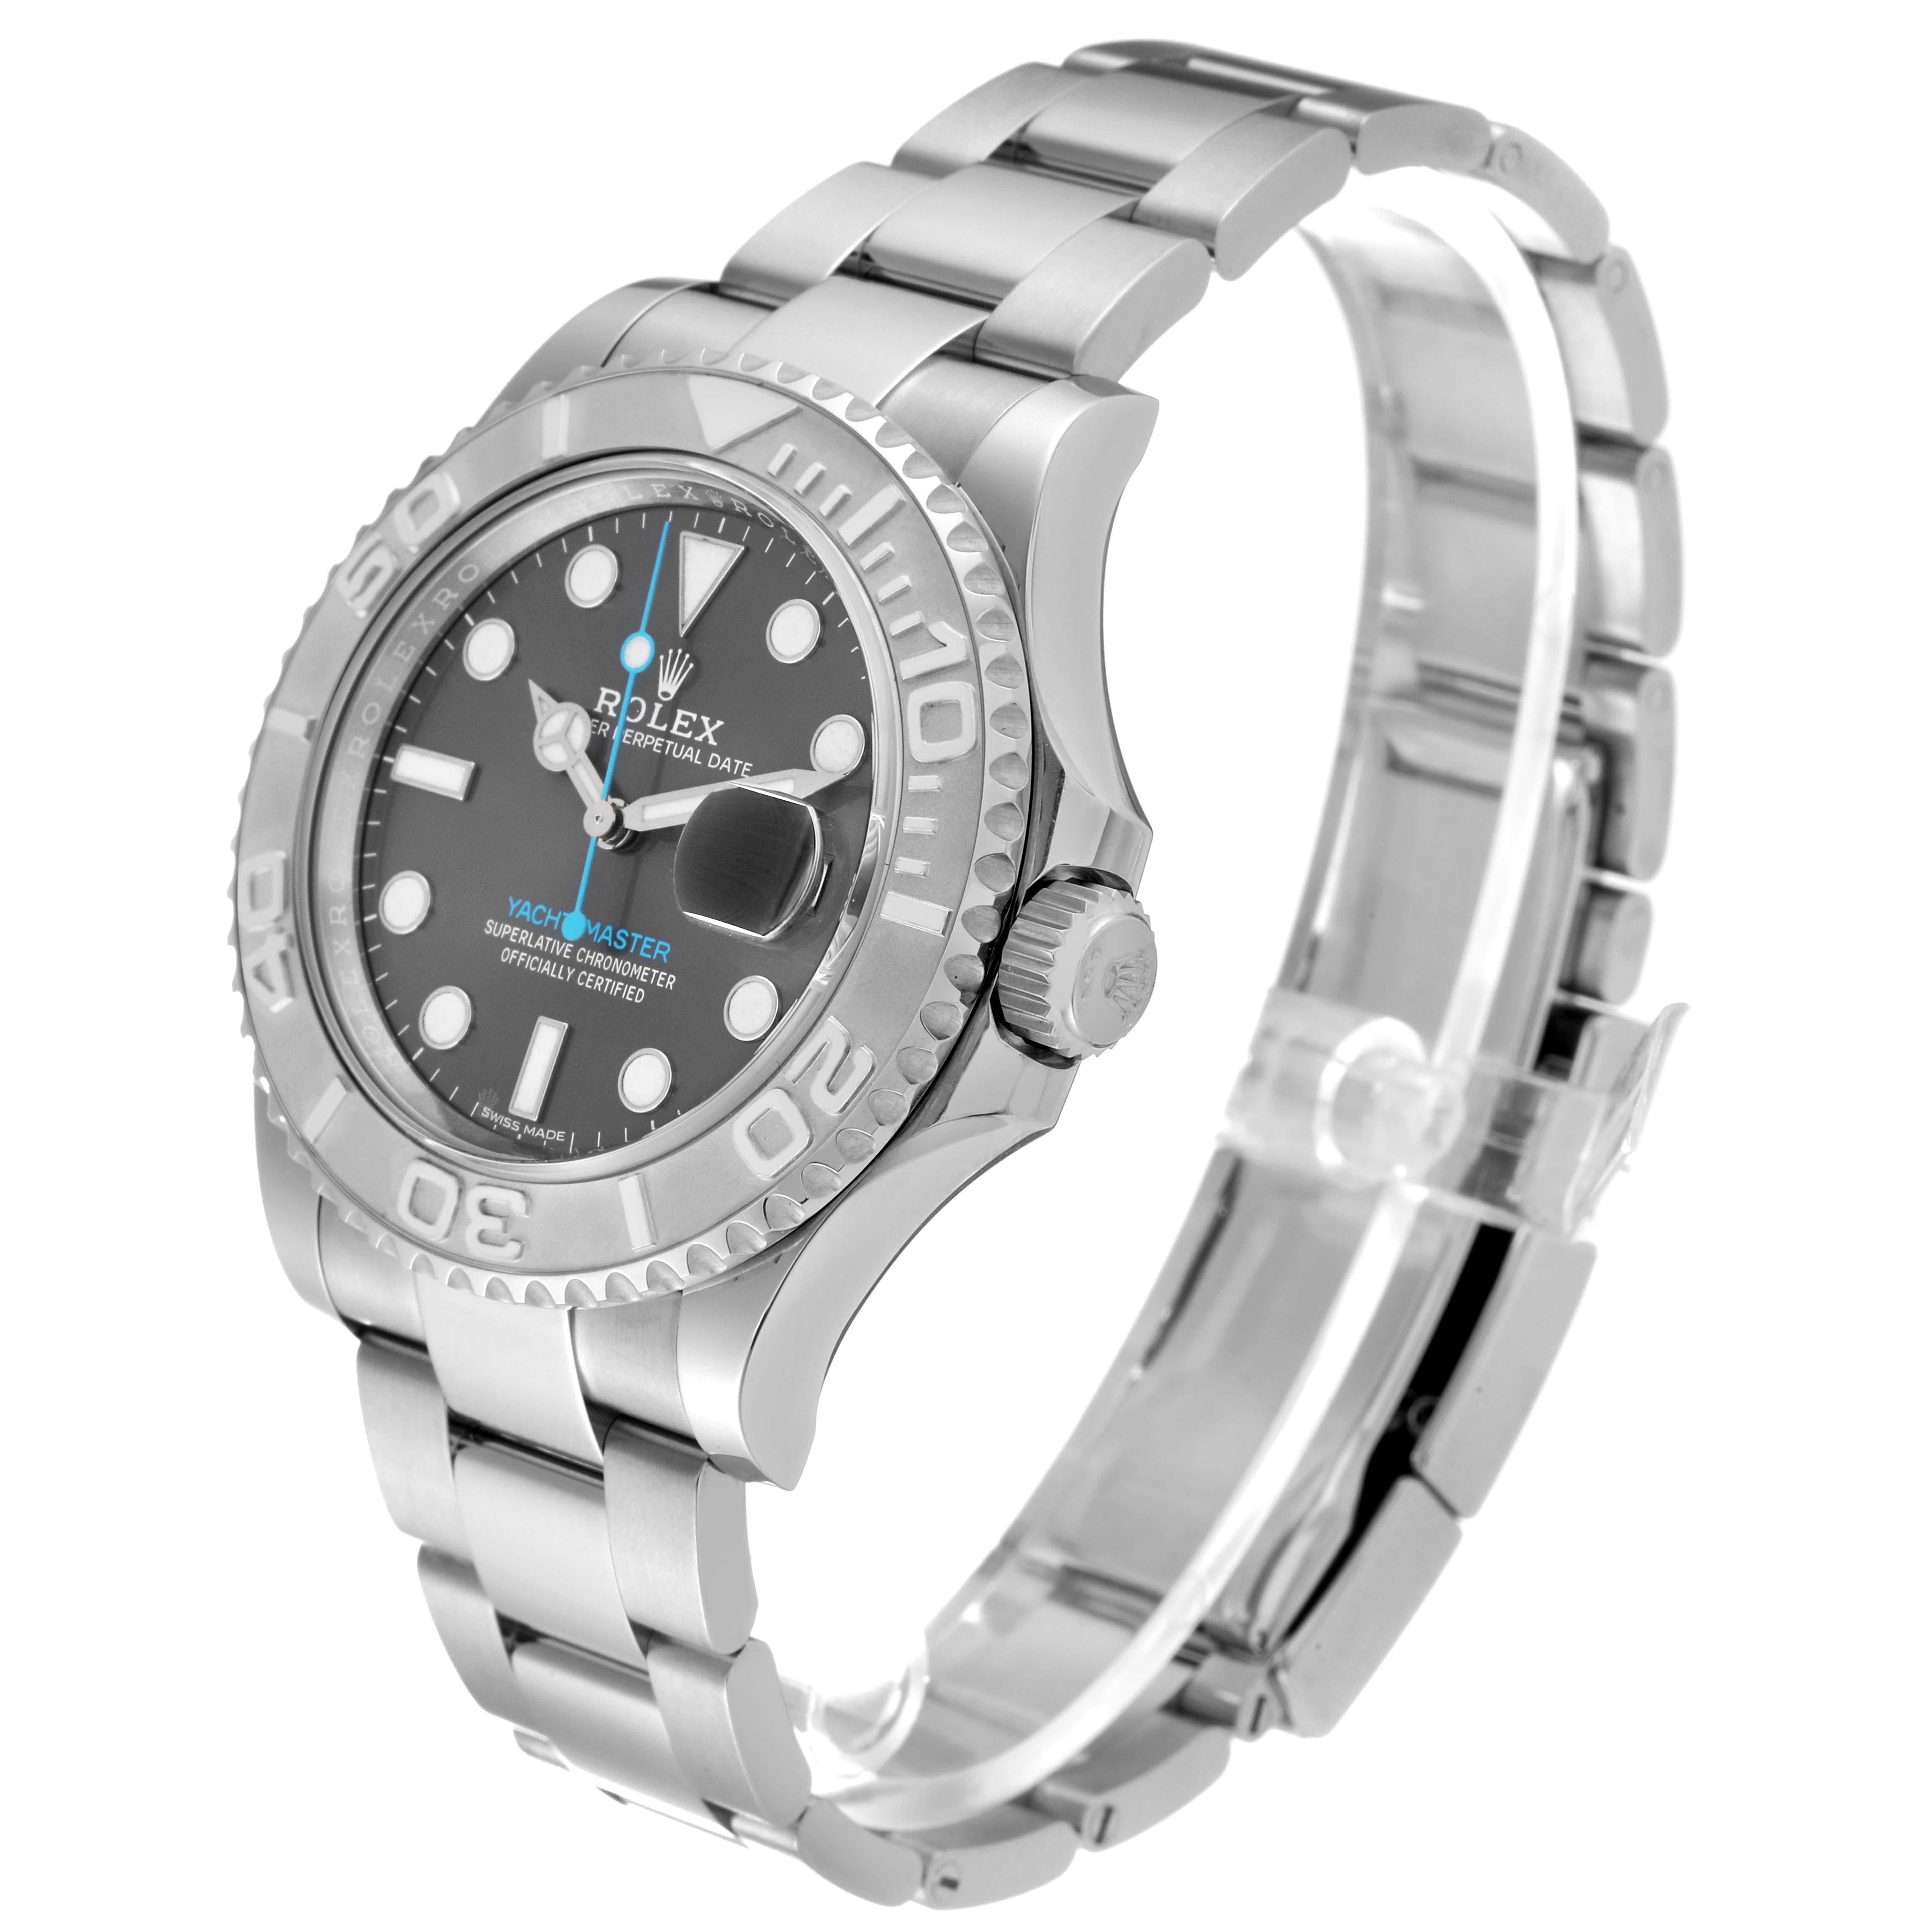 Rolex Yachtmaster Rhodium Dial Steel Platinum Mens Watch 116622 Box Card For Sale 3